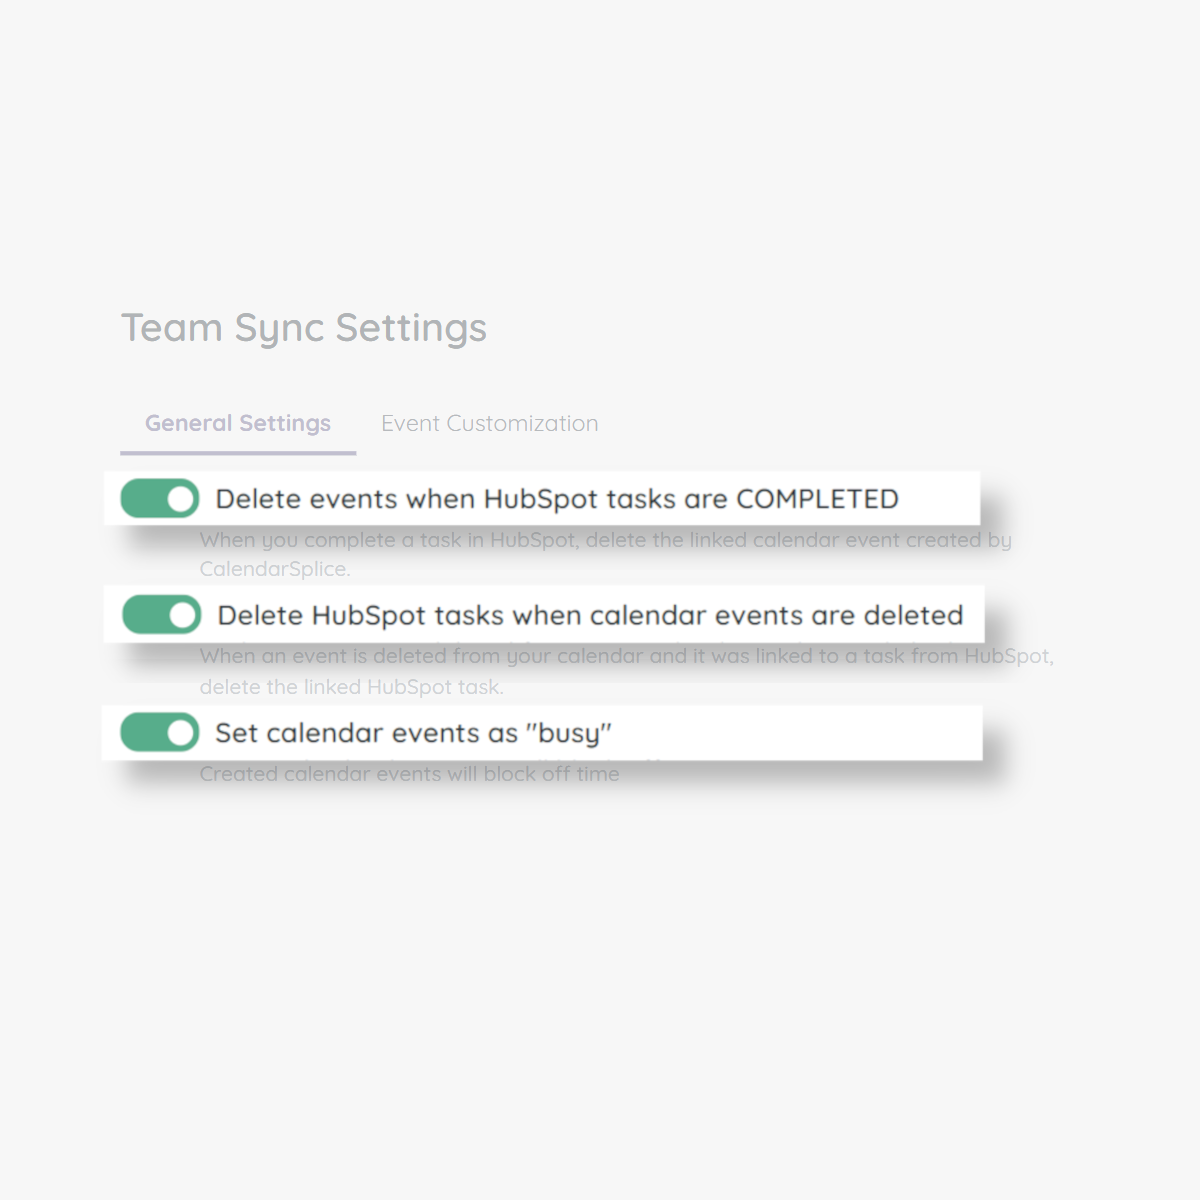 Configure settings to have more control over task syncing for your team.